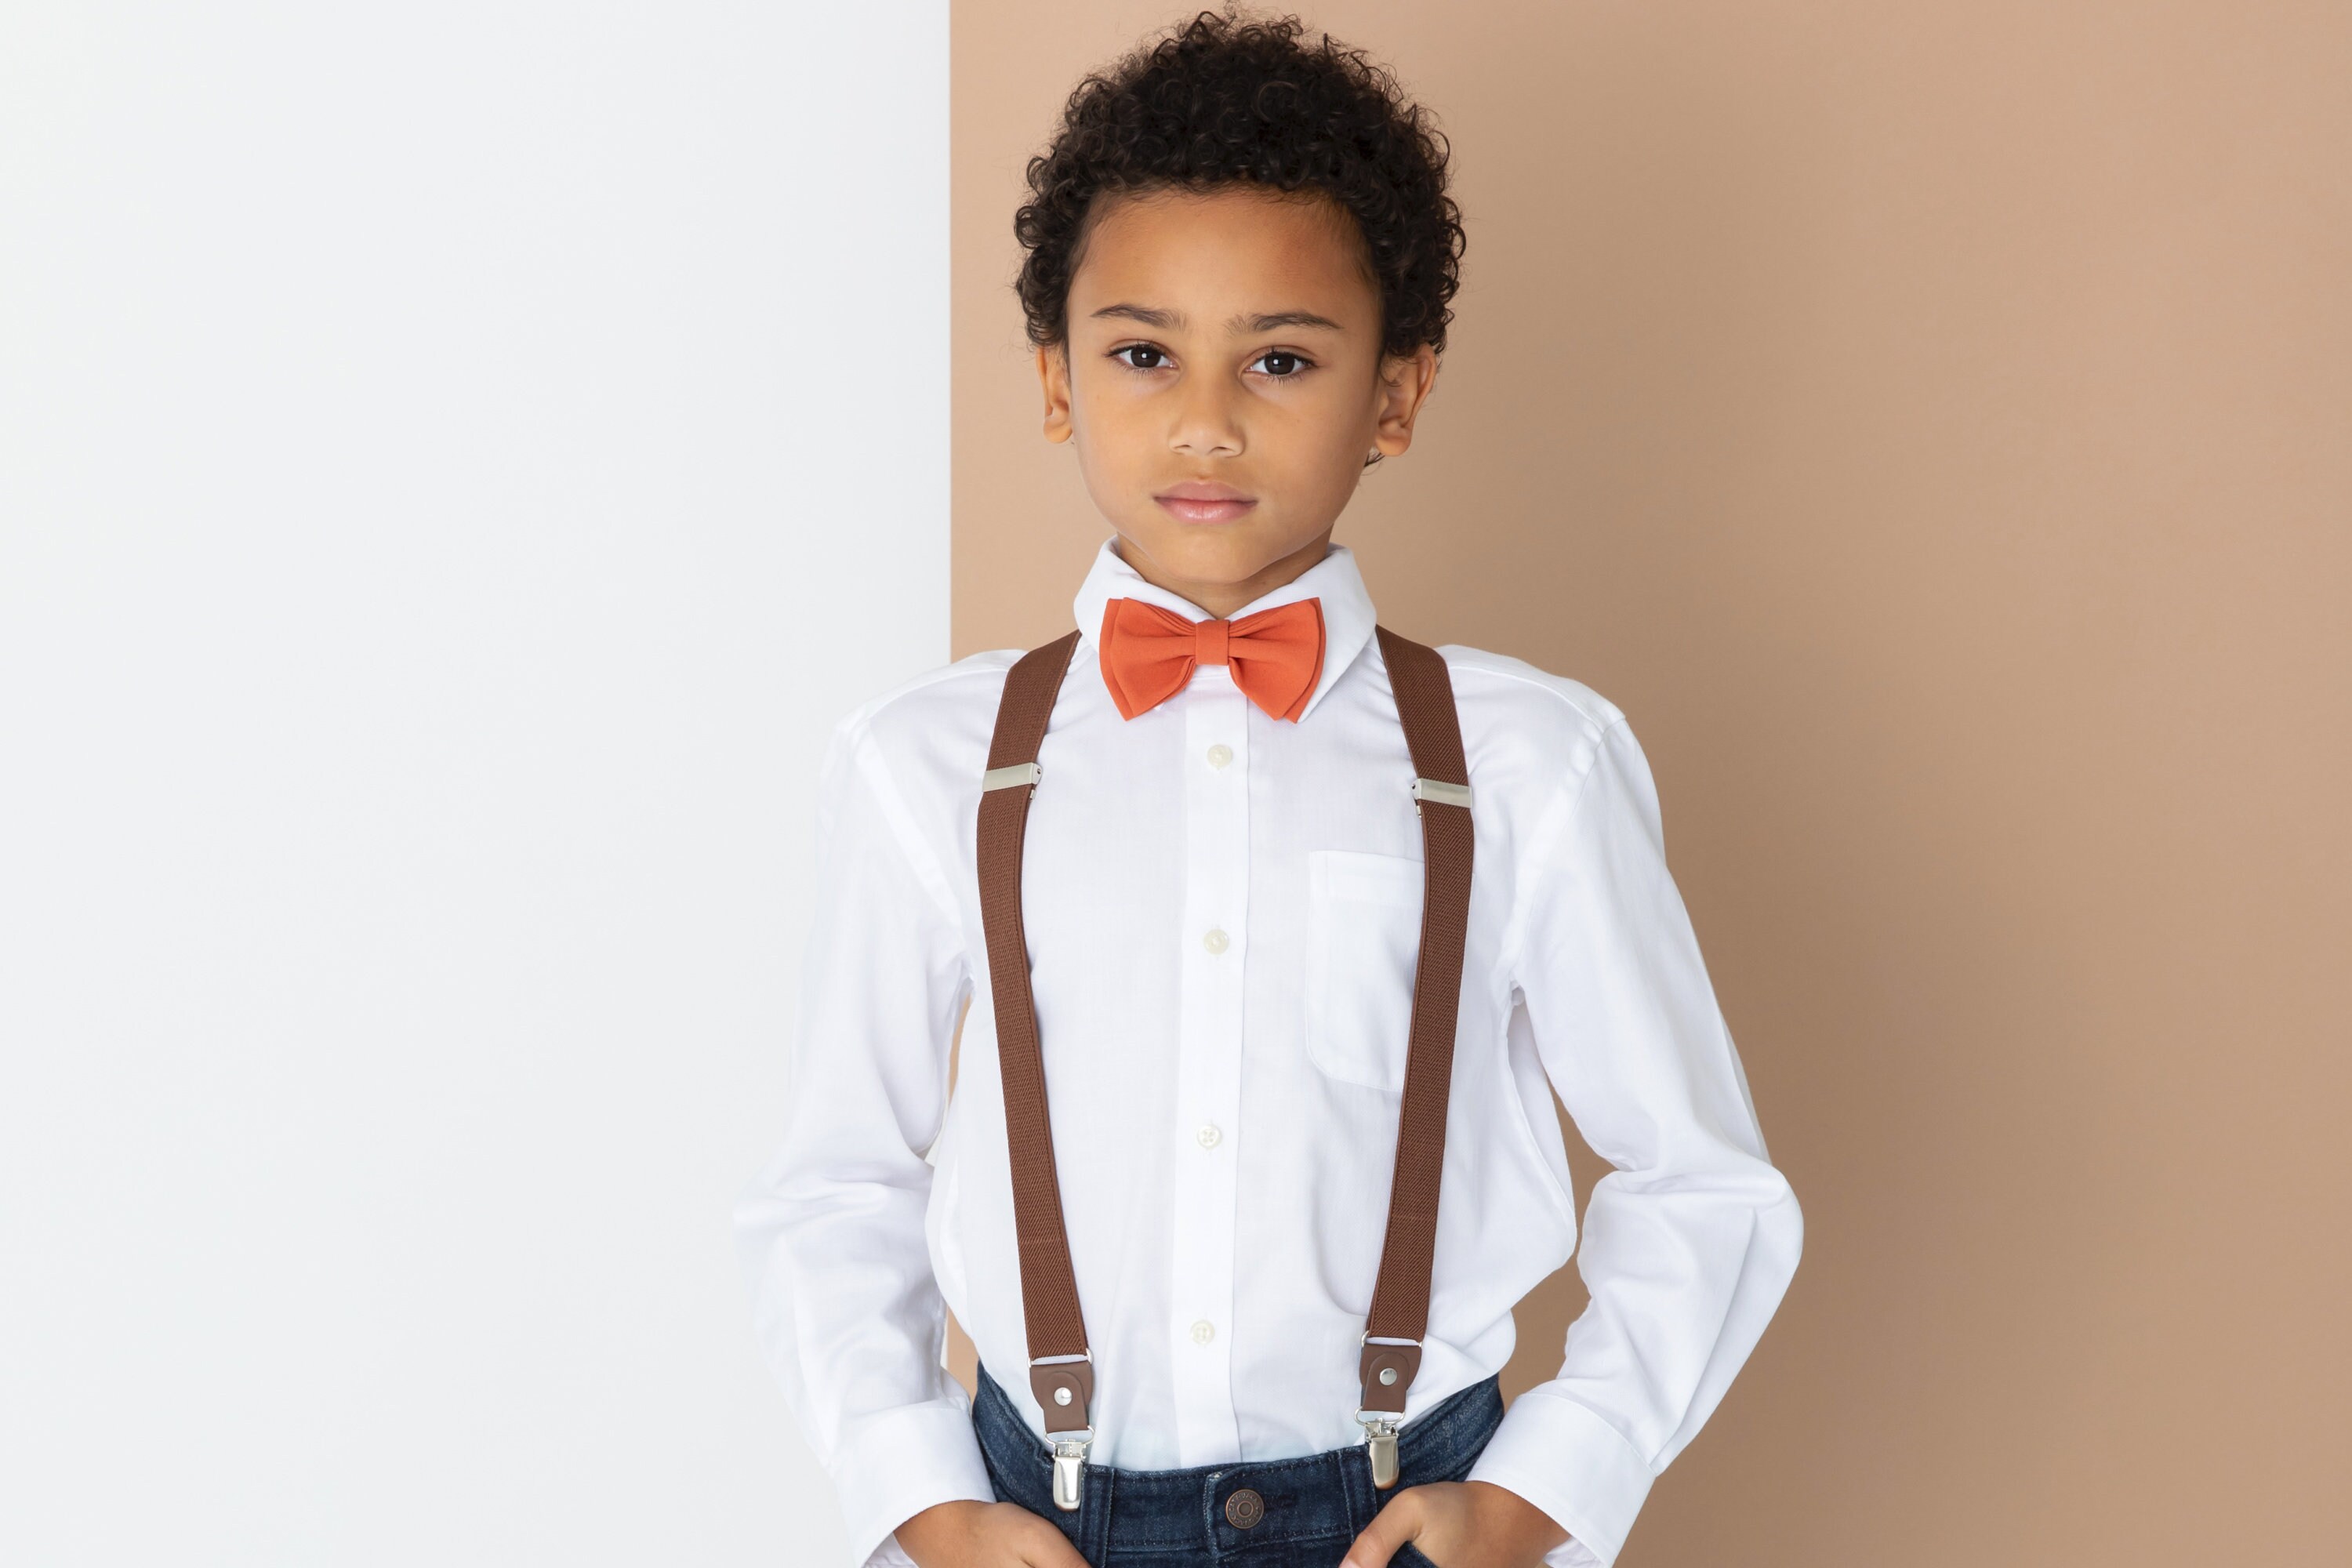 11 Amazing Suspenders For Boys for 2023